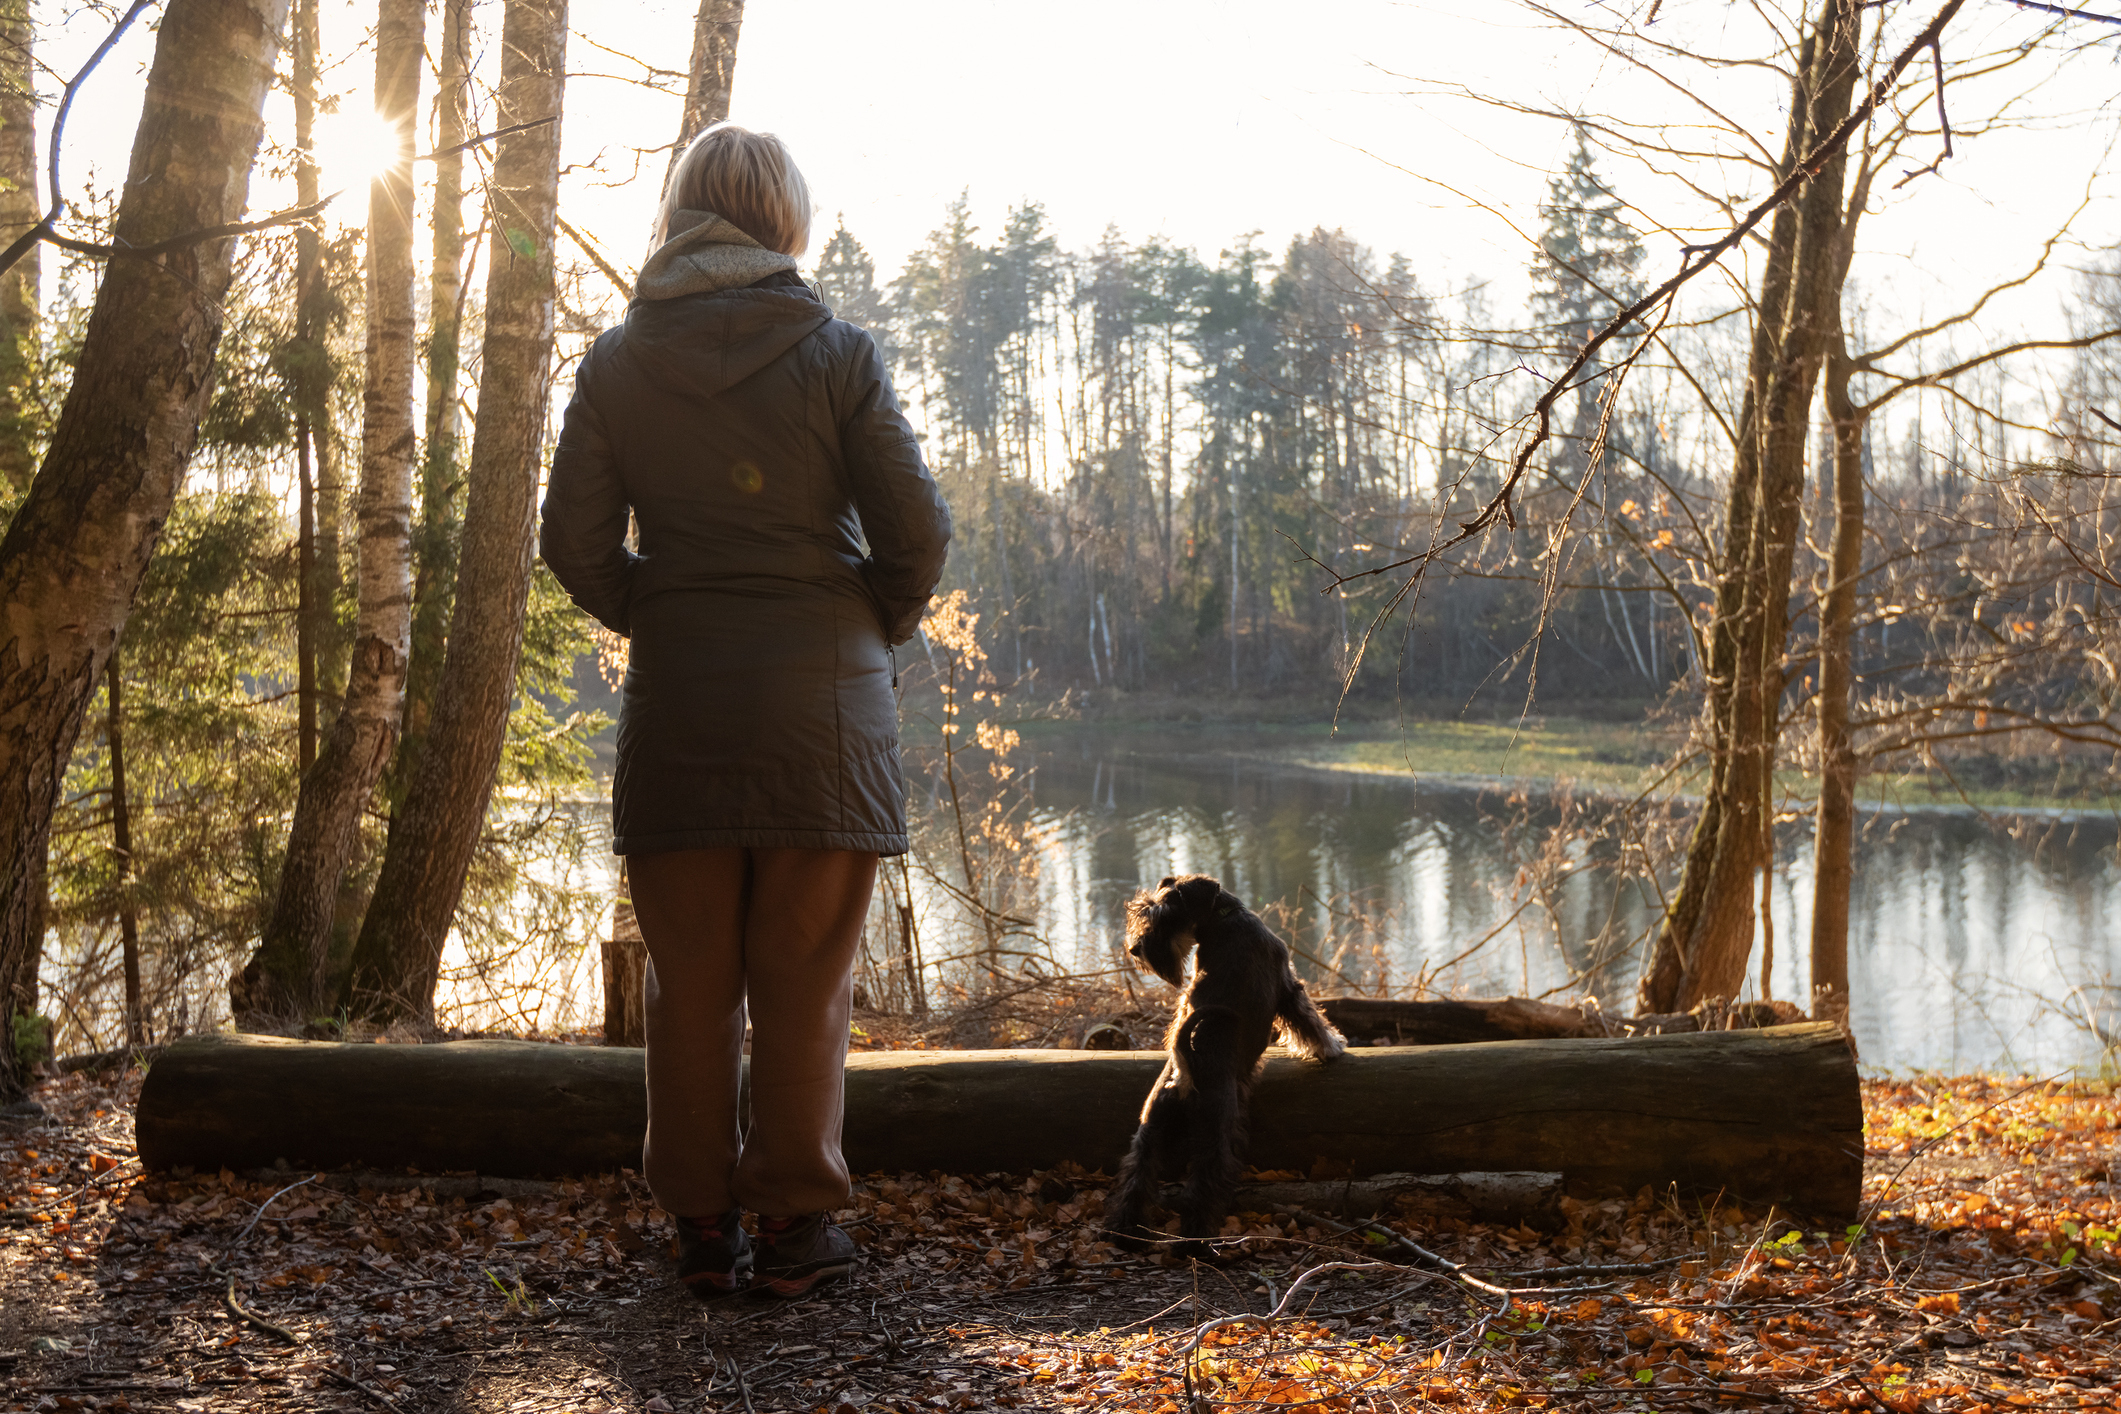 Person standing next to a dog by a lake, surrounded by trees, with sunlight filtering through